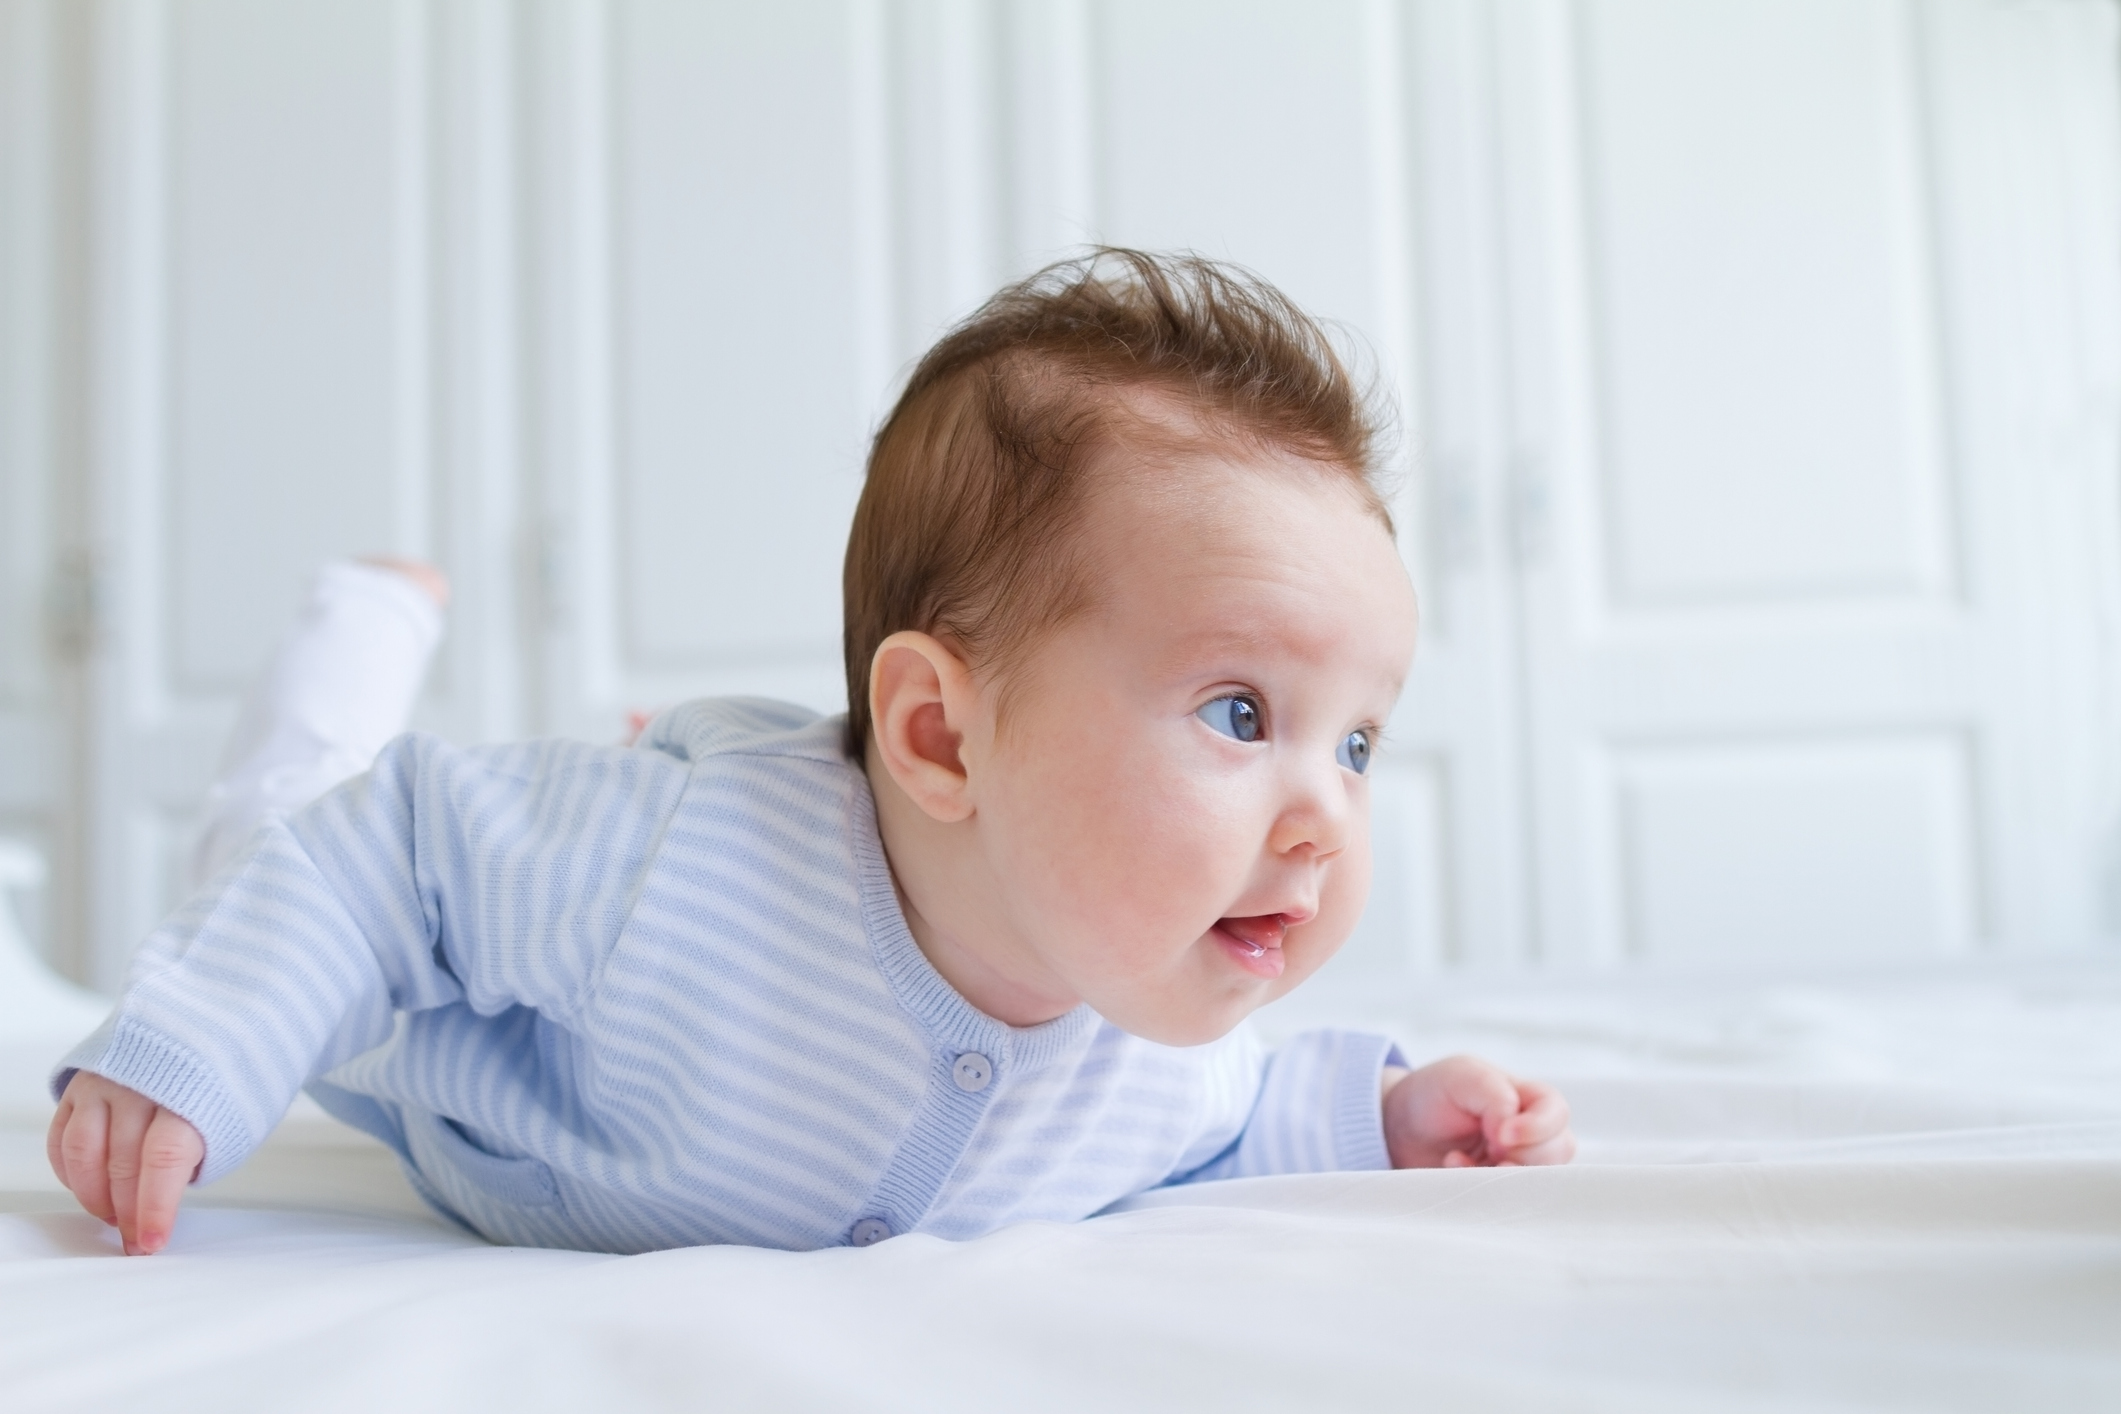 Tummy Time and Brain Development - Any Baby Can